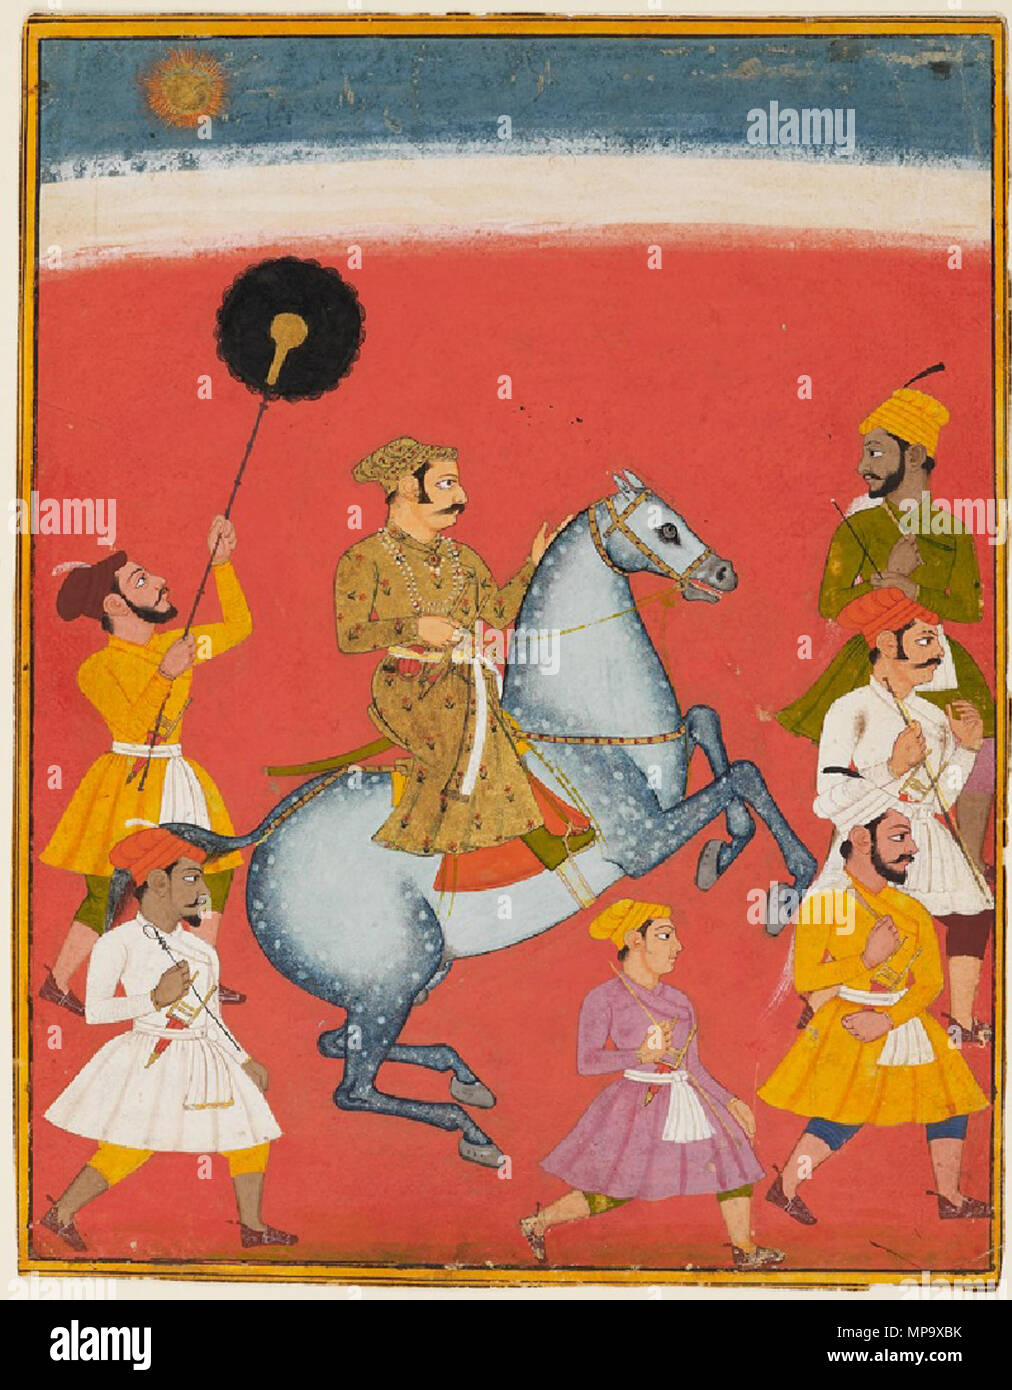 . Maharana Raj Singh riding, Udaipur, c1670 Raj Singh I, Maharana of Mewar (ruled 1652 - 1680) Mounted on a rearing horse, Maharana Raj Singh is accompanied by attendants on foot. This boldly coloured reinterpretation of a common Mughal portrait convention represents the Mewar ruler more as the ideal Rajput martial hero than as a closely observed individual. Source: Ashmolean Museum, University of Oxford . 1670. Unknown 845 Maharana Raj Singh riding Stock Photo